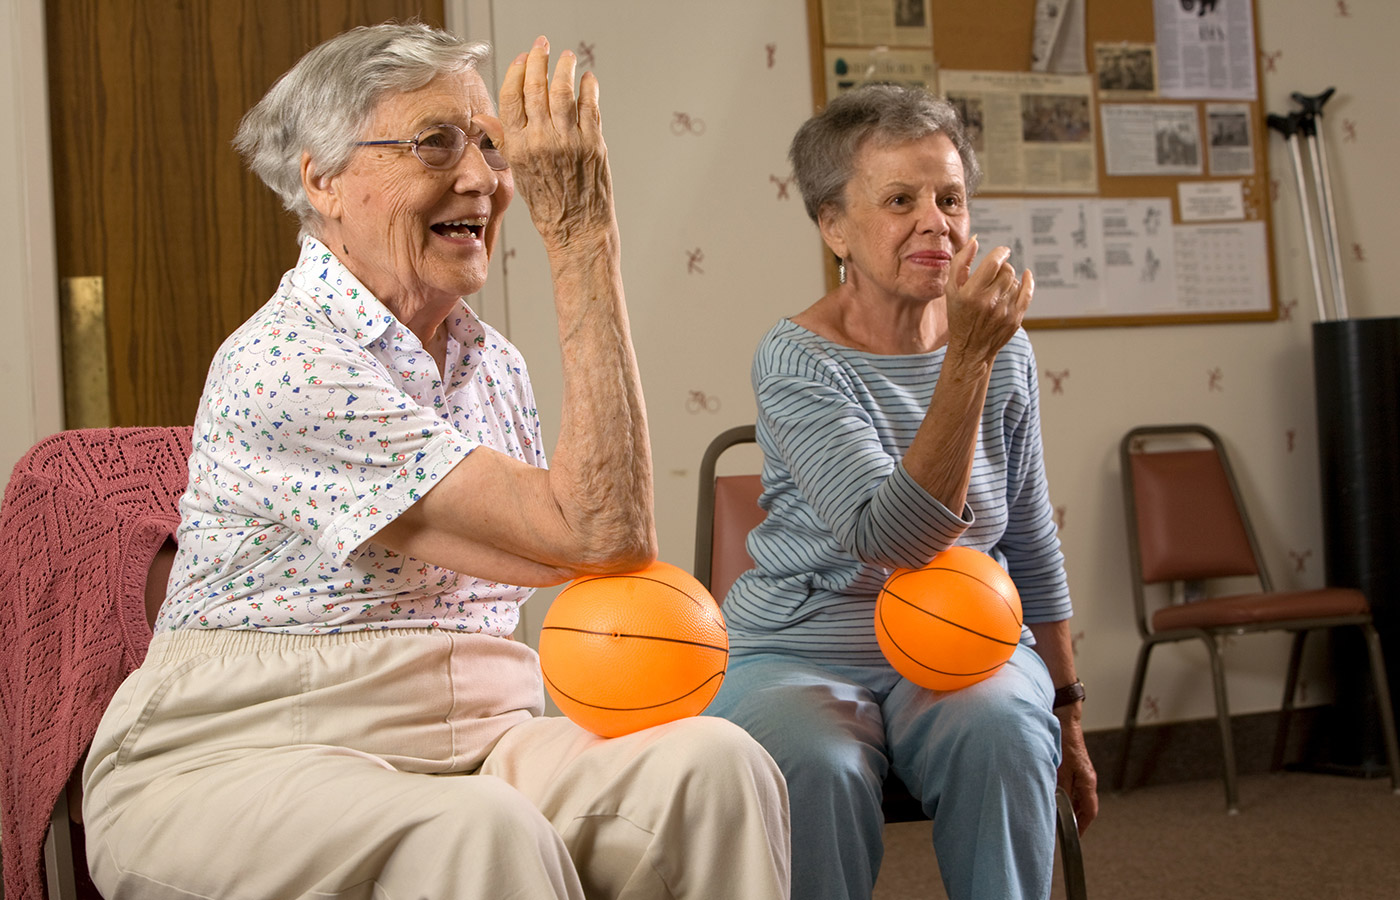 Two residents are in a fitness class.